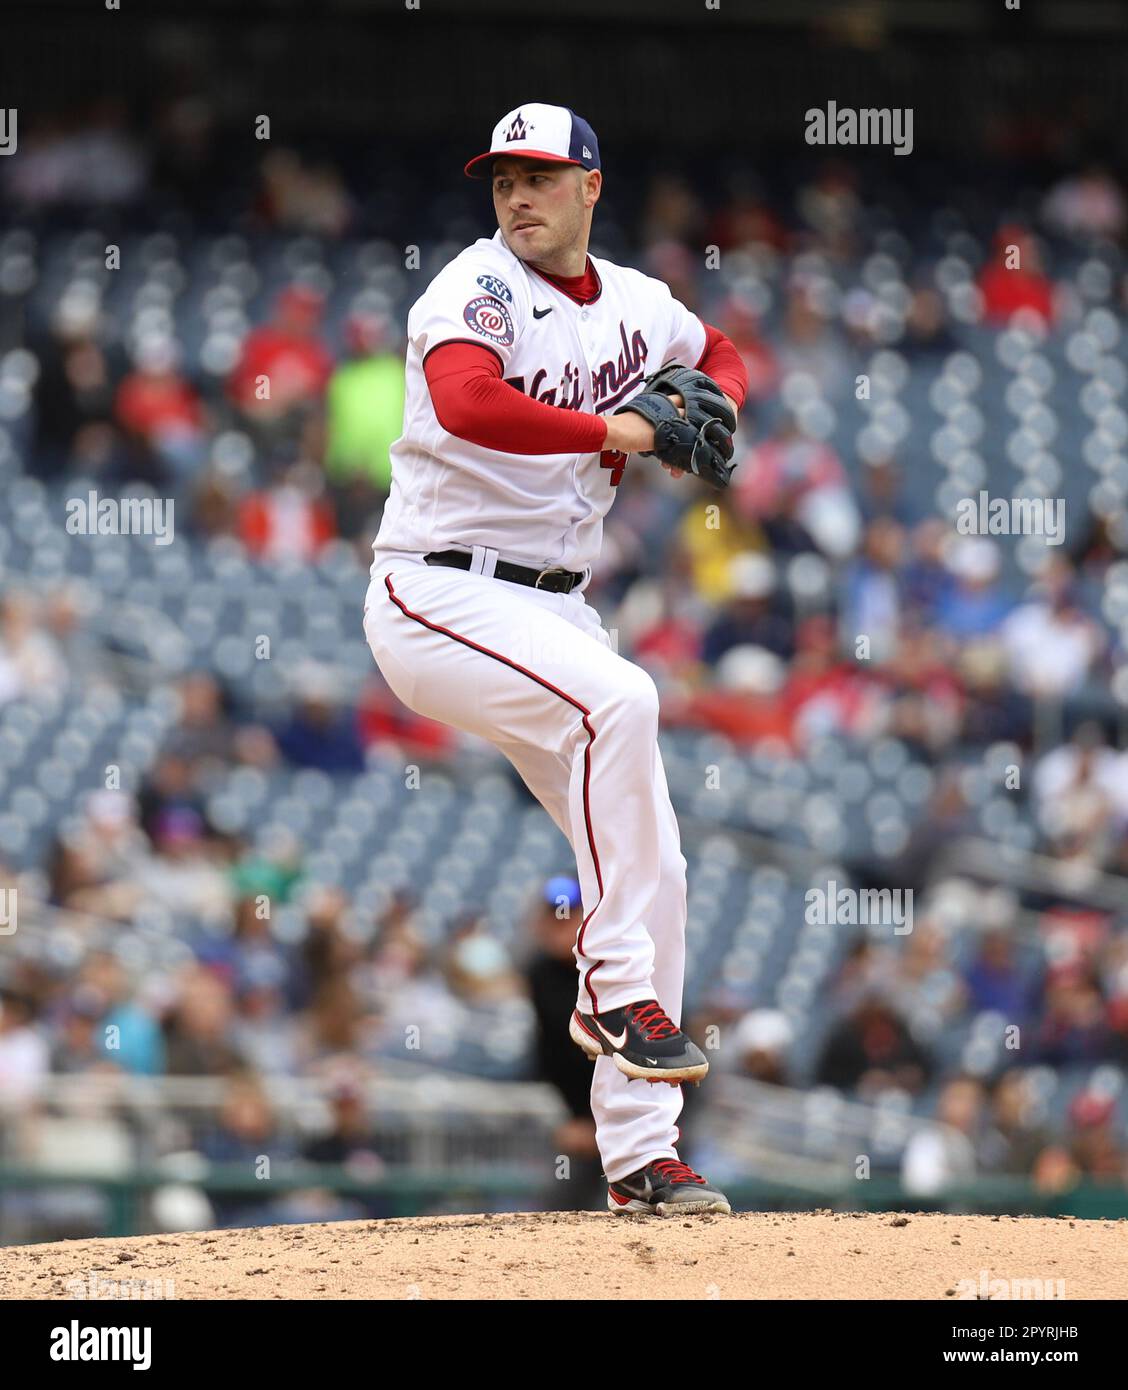 Washington Dc, United States. 04th May, 2023. Washington Nationals pitcher Patrick  Corbin (46)on the mound during the top of the fifth inning at the  Washington Nationals vs Chicago Cubs game at Nationals